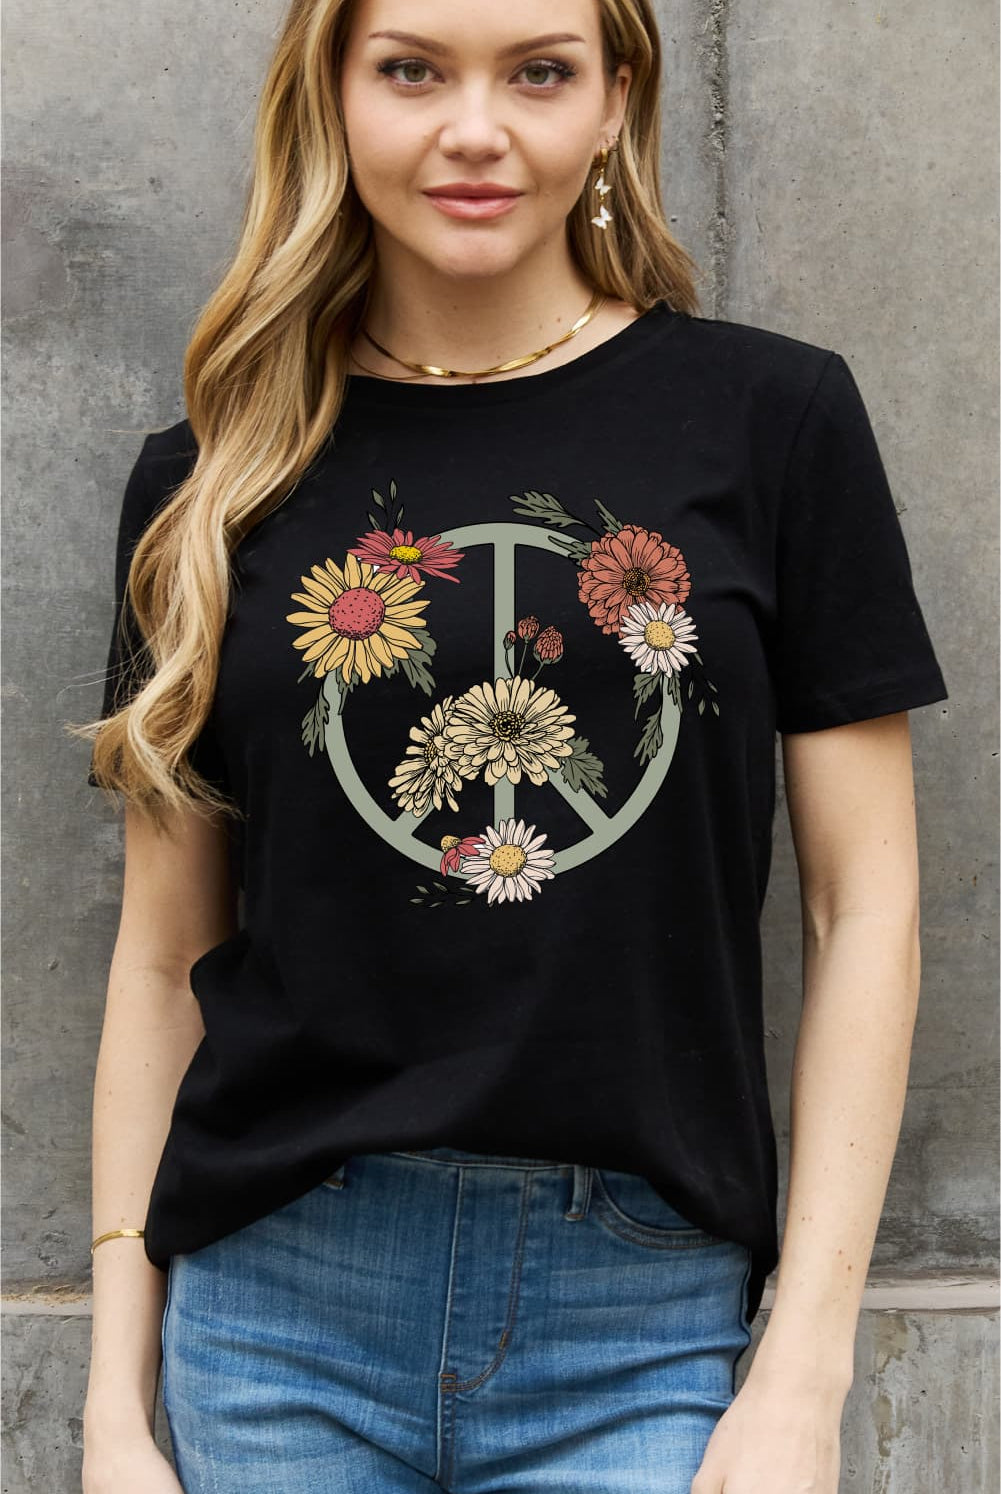 Dark Slate Gray Simply Love Full Size Flower Graphic Cotton Tee Tops